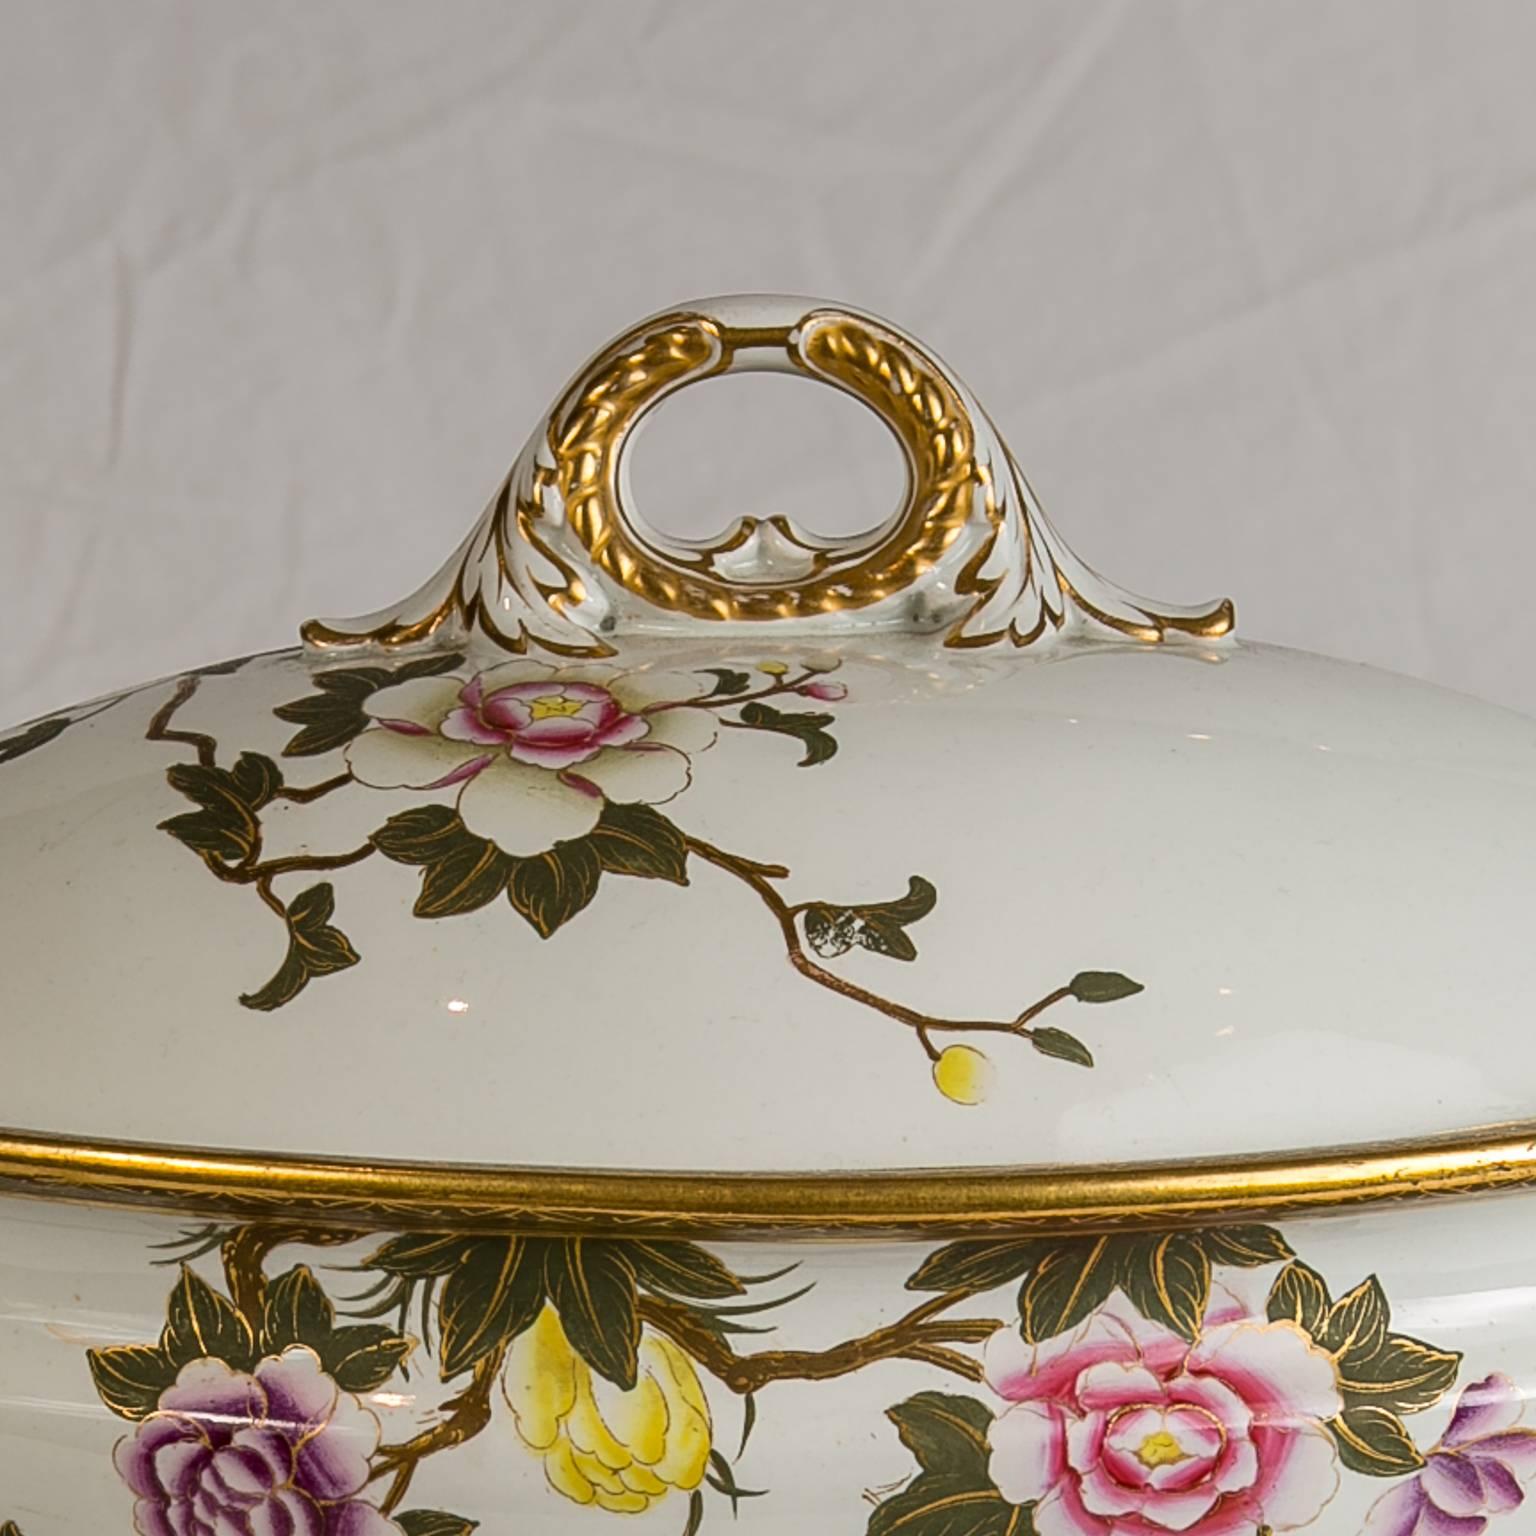 Great Britain (UK) Royal Worcester Porcelain Soup Tureen Made in 1851 For Sale